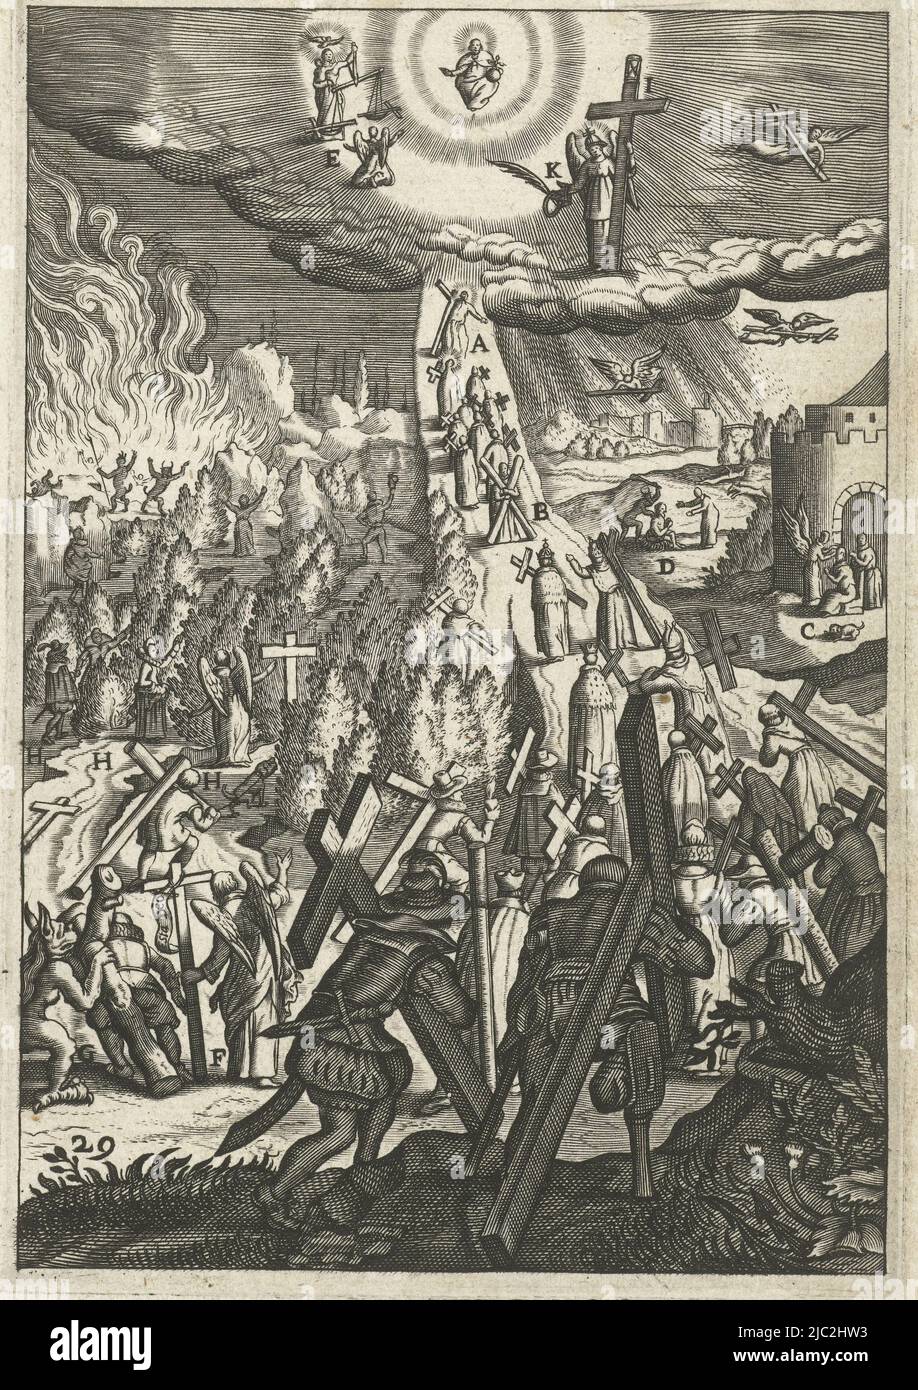 Men and women carry a cross on their way of life. The meditation precept urges awareness of all the misfortunes that can befall a man, Emblem with man carrying his cross and aware of misfortunes on his way Den wech des eeuwich levens (series title), Boëtius Adamsz. Bolswert, print maker: anonymous, publisher: Hendrik Aertssens (II), Antwerp, 1620 - 1623 and/or 1623, paper, engraving, h 139 mm × w 90 mm Stock Photo